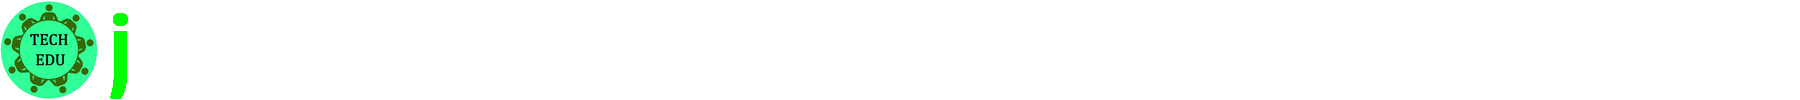 Journal of Applied Technical and Educational Sciences logo